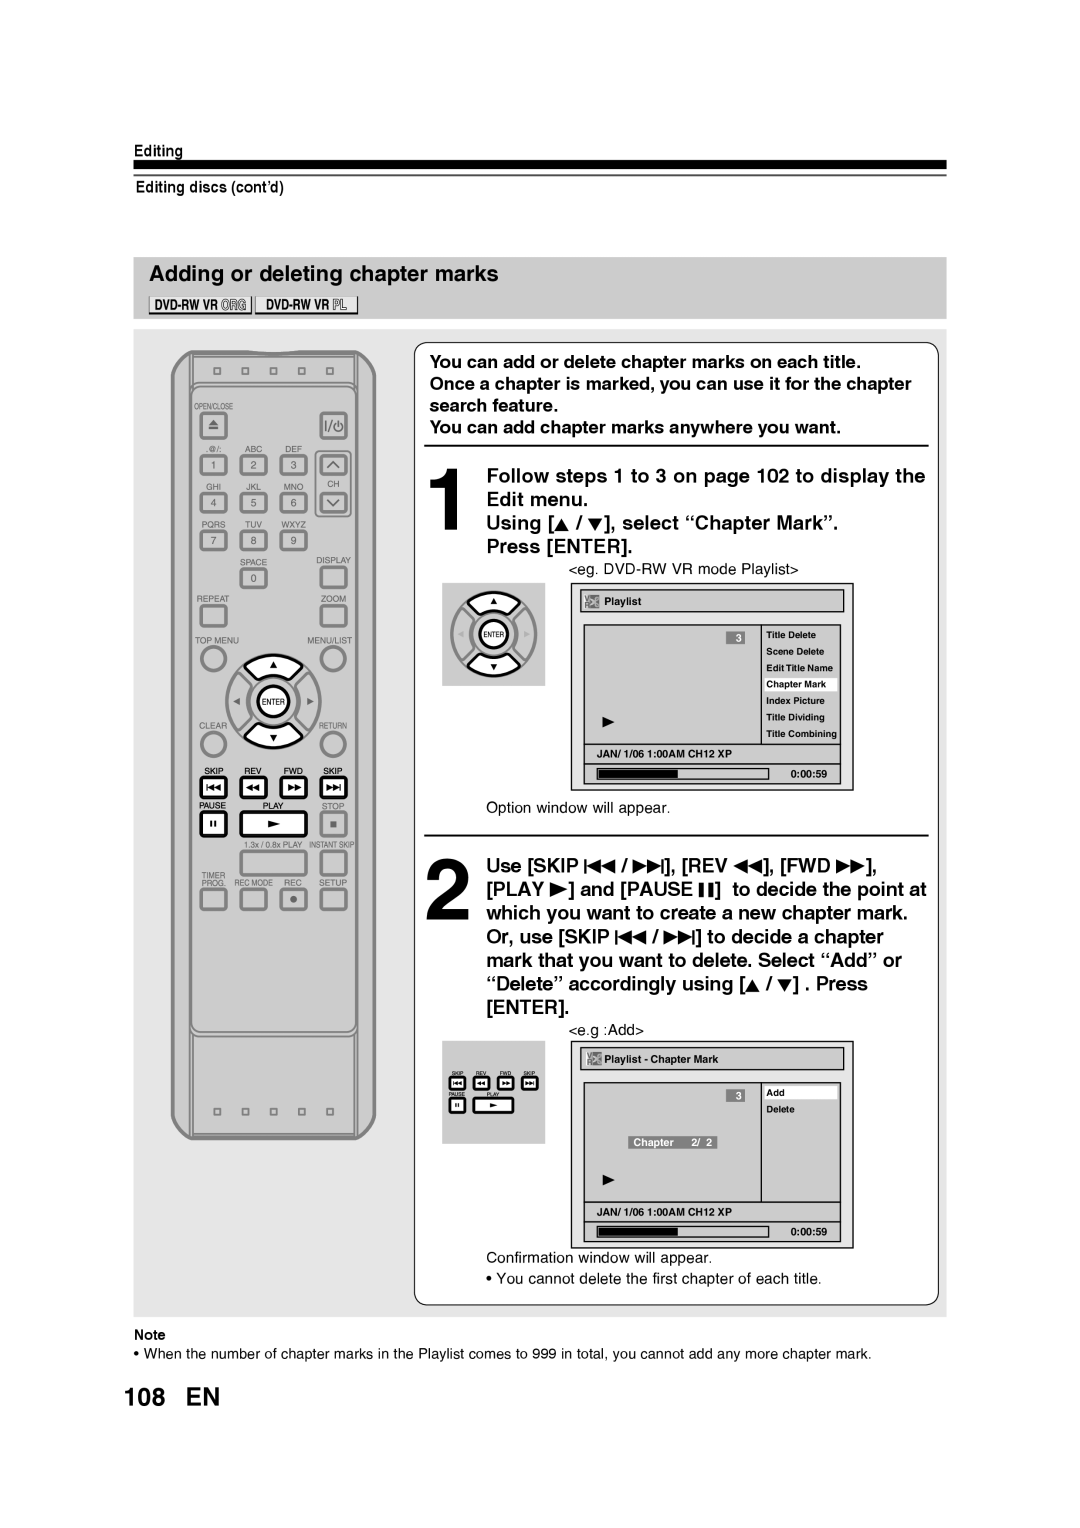 Toshiba D-RW2SU/D-RW2SC manual 108 EN, Adding or deleting chapter marks, Using K / L, select “Chapter Mark” Press ENTER 